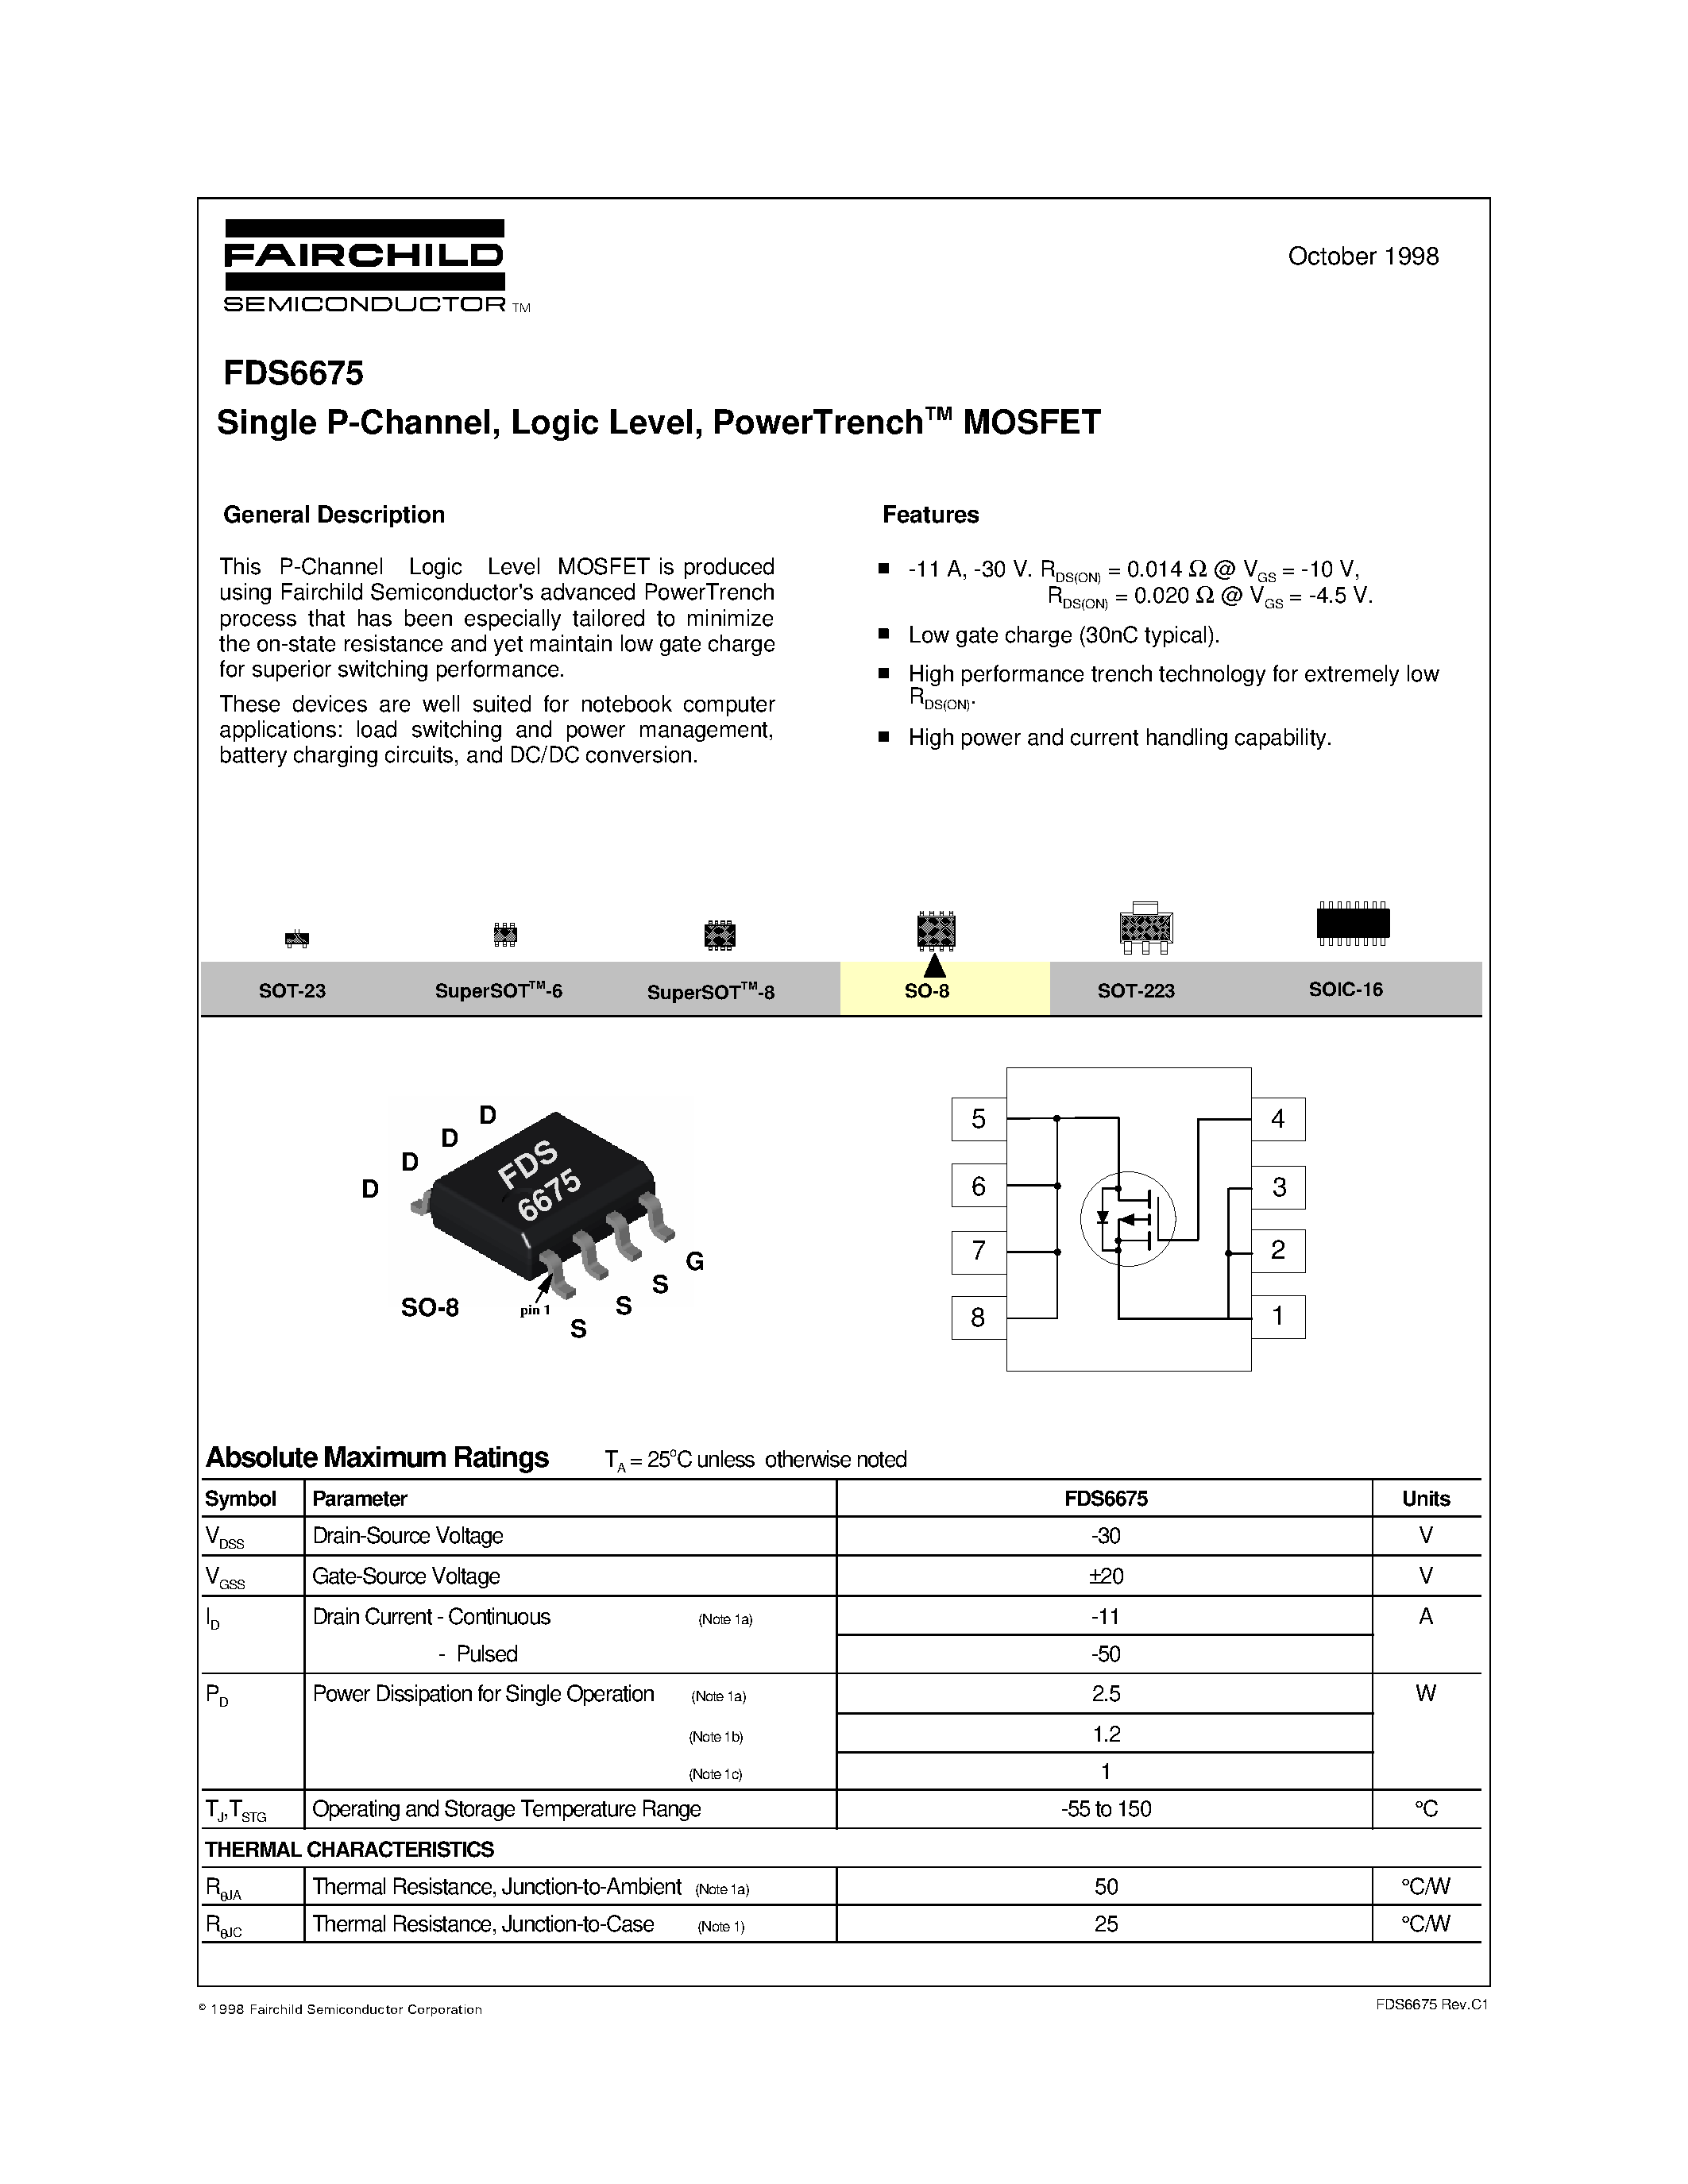 Даташит FDS6675 - Single P-Channel/ Logic Level/ PowerTrenchTM MOSFET страница 1